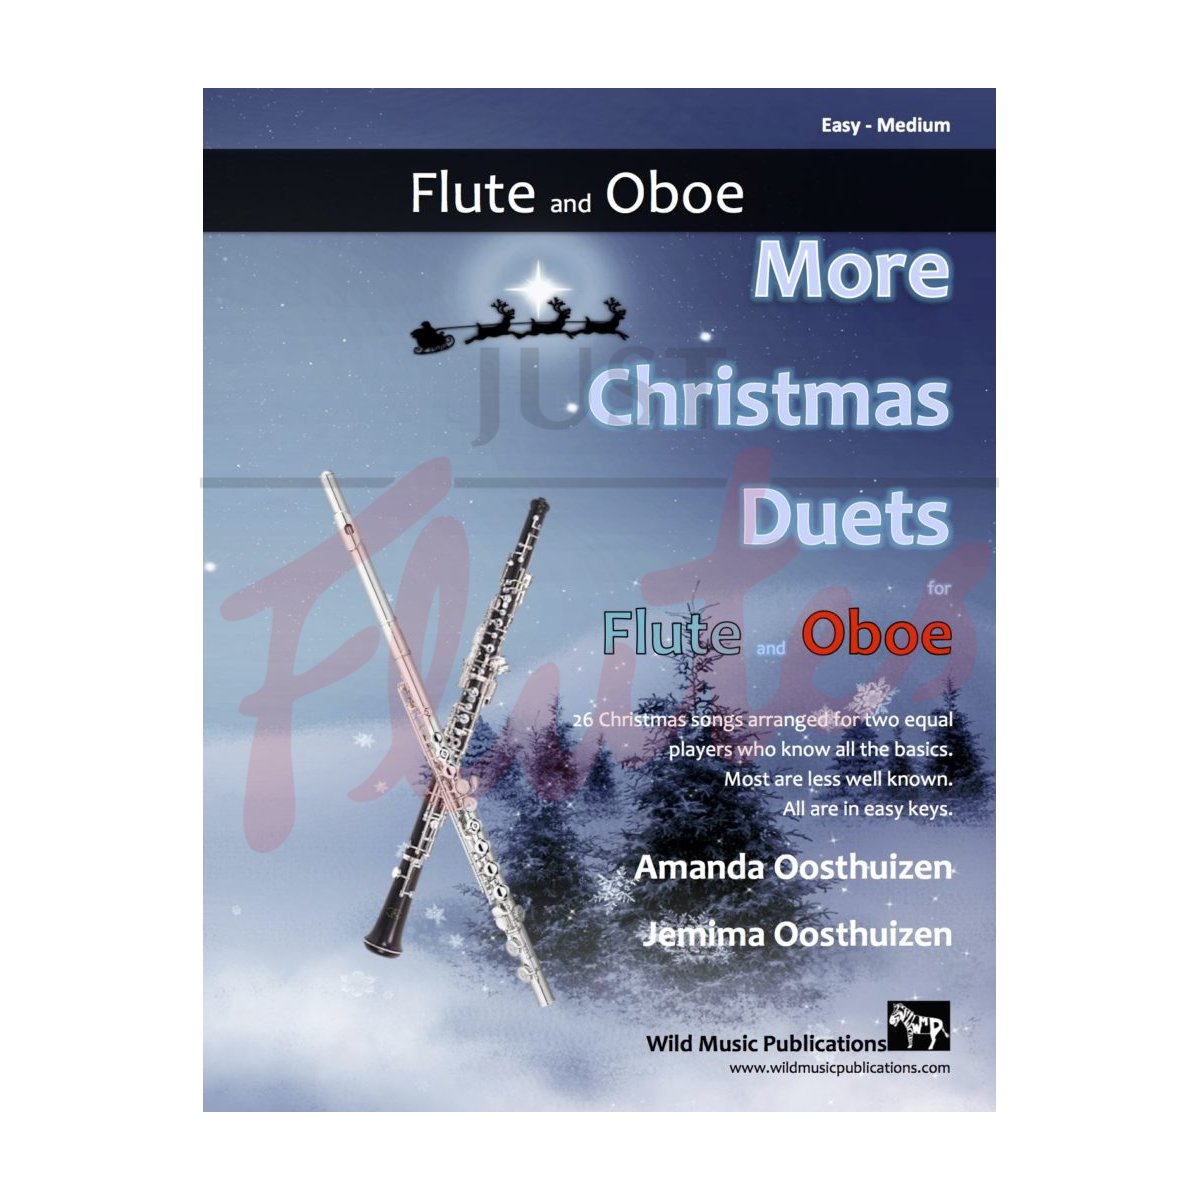 More Christmas Duets for Flute and Oboe